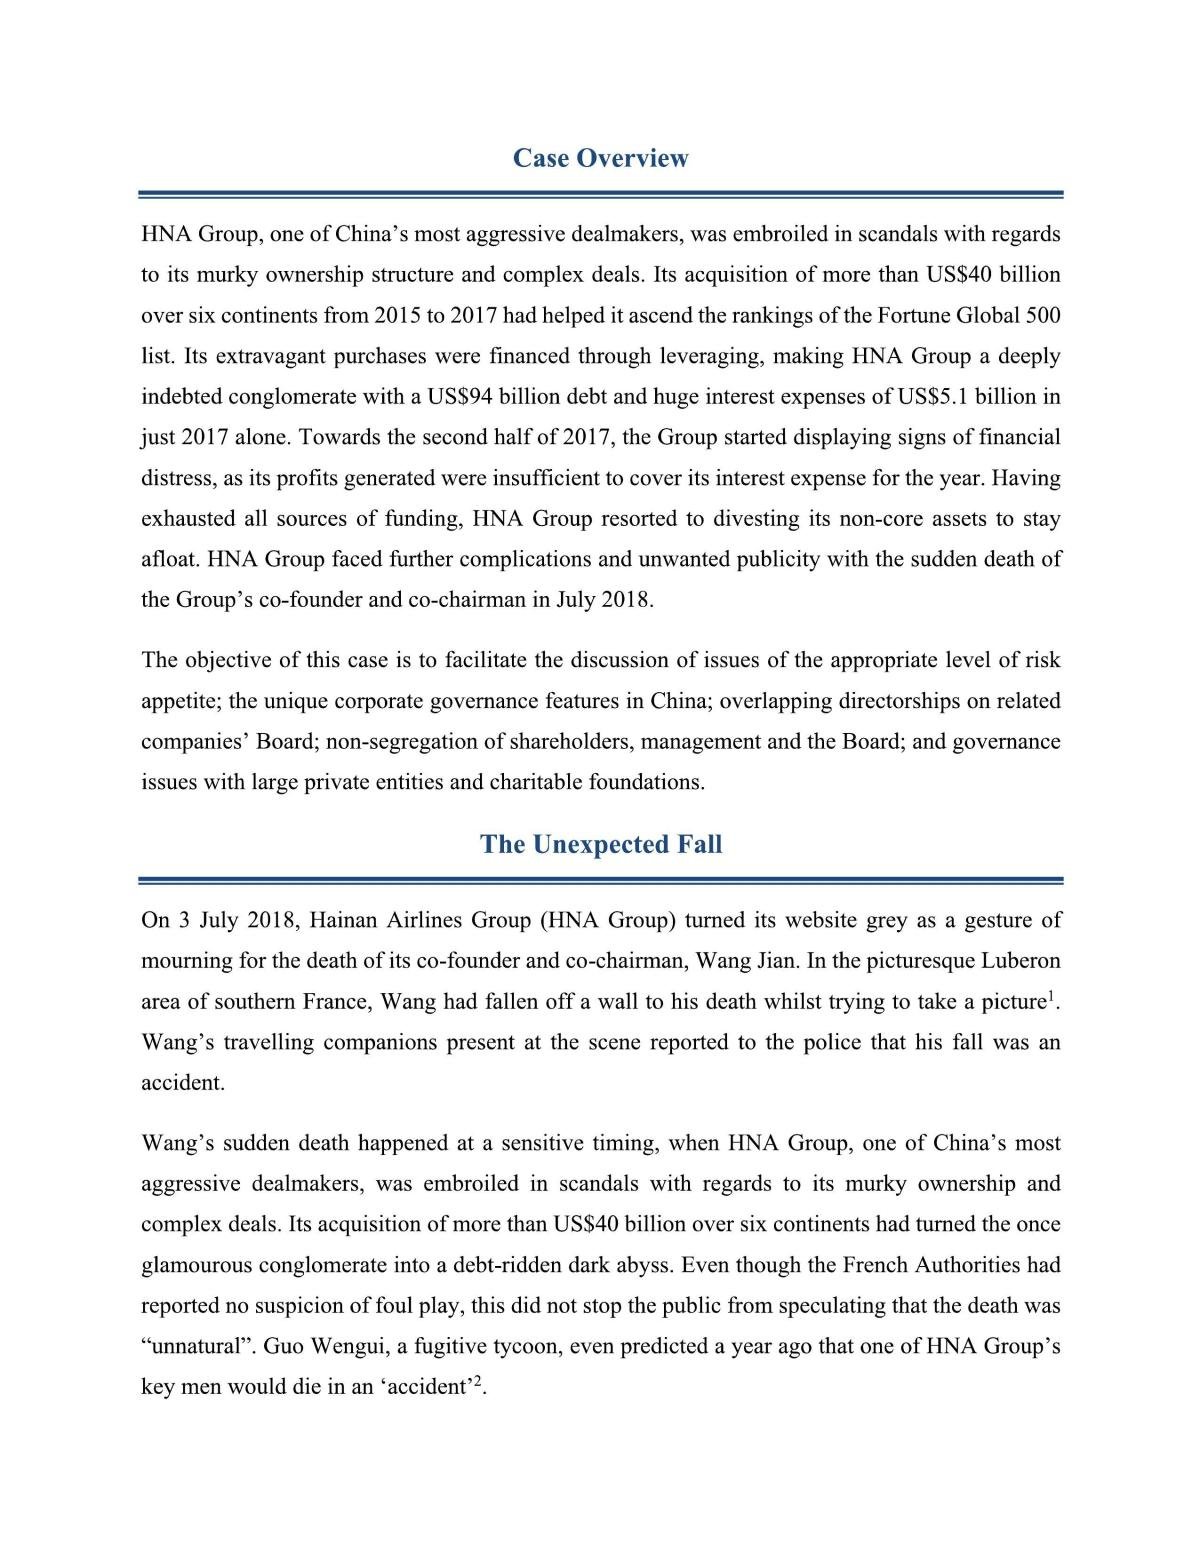 ACC3706 - Case report on the fail of Hainan Airlines Group - Page 1